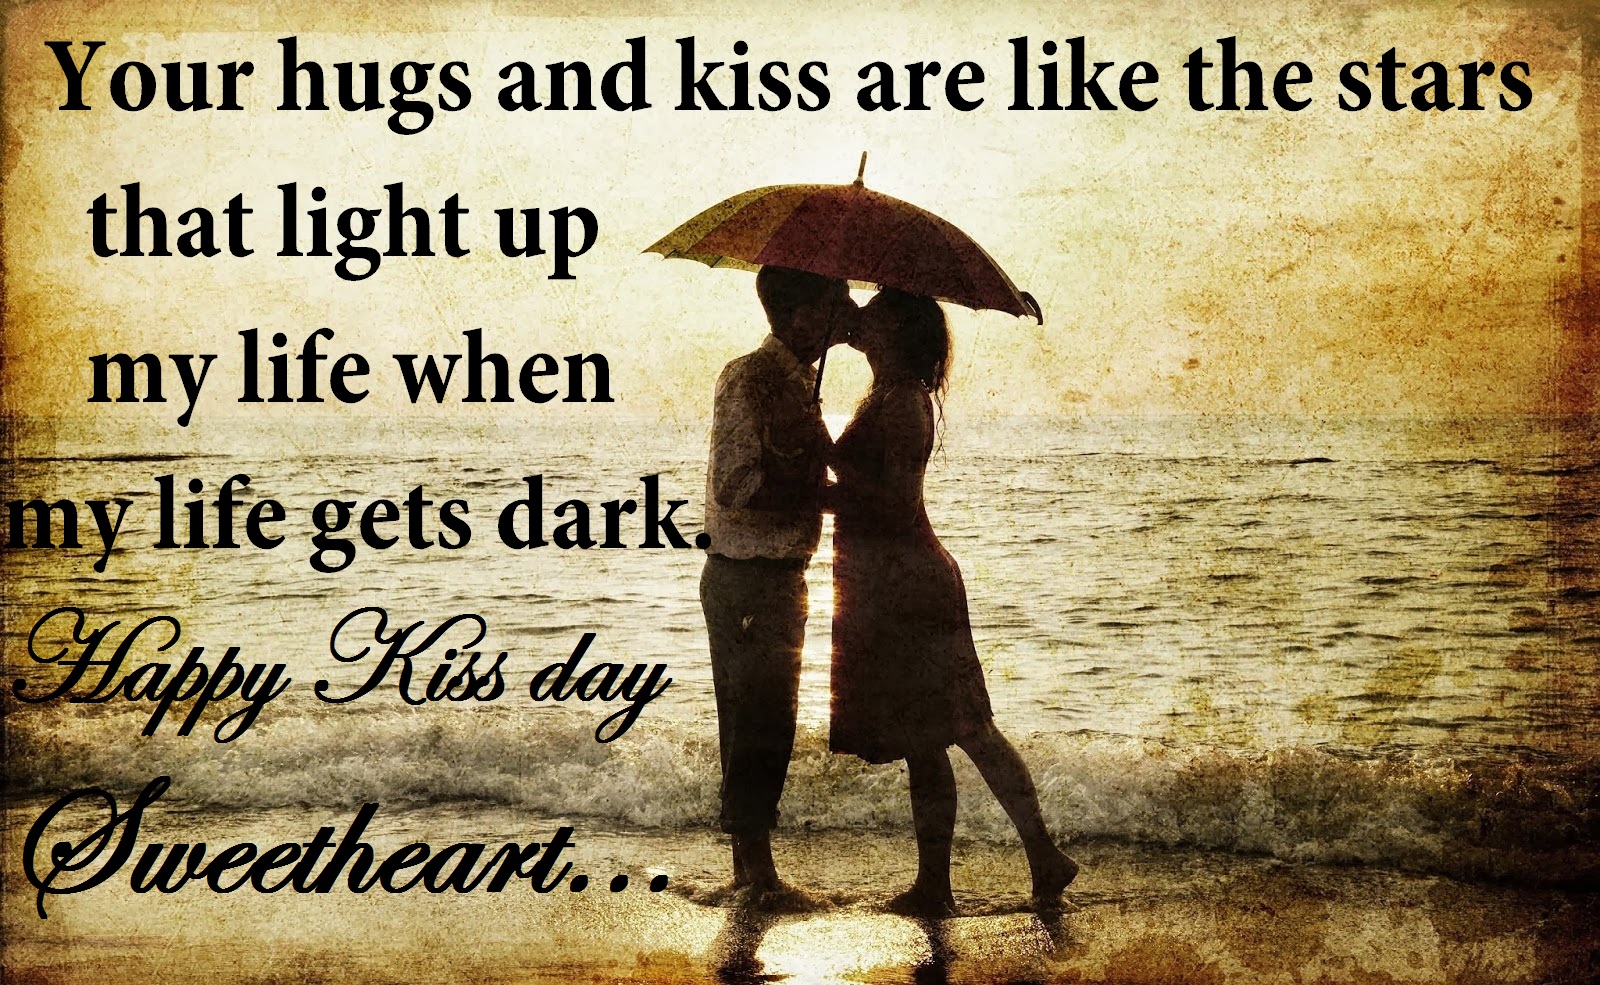 kiss day images free for you